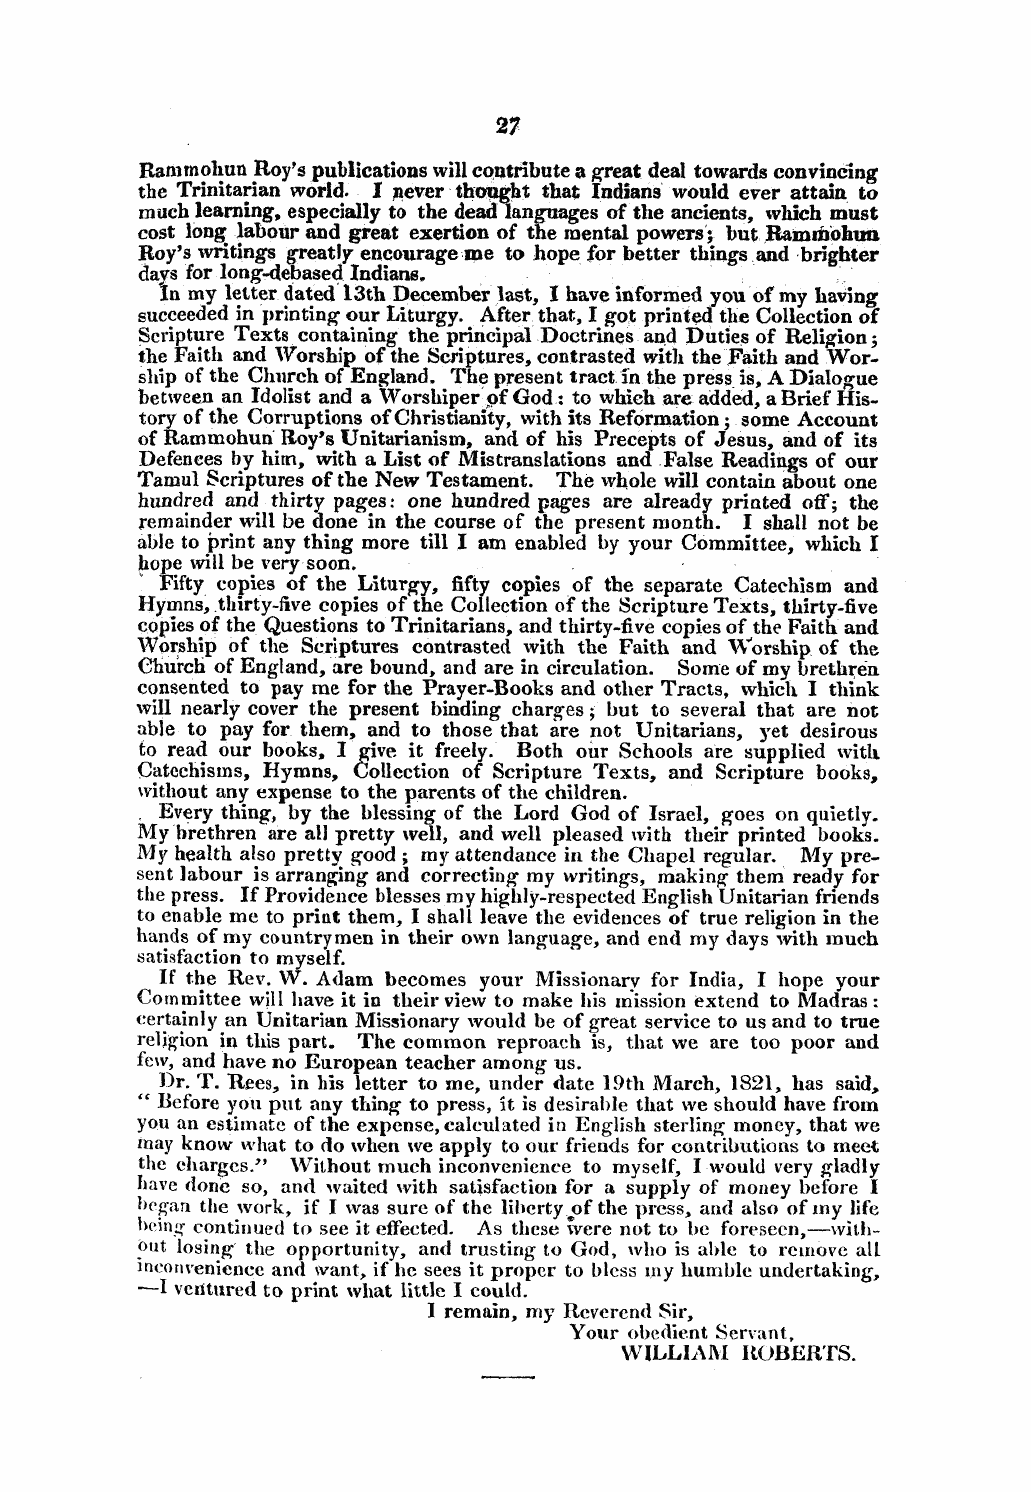 Monthly Repository (1806-1838) and Unitarian Chronicle (1832-1833): F Y, 1st edition, Supplement - 27